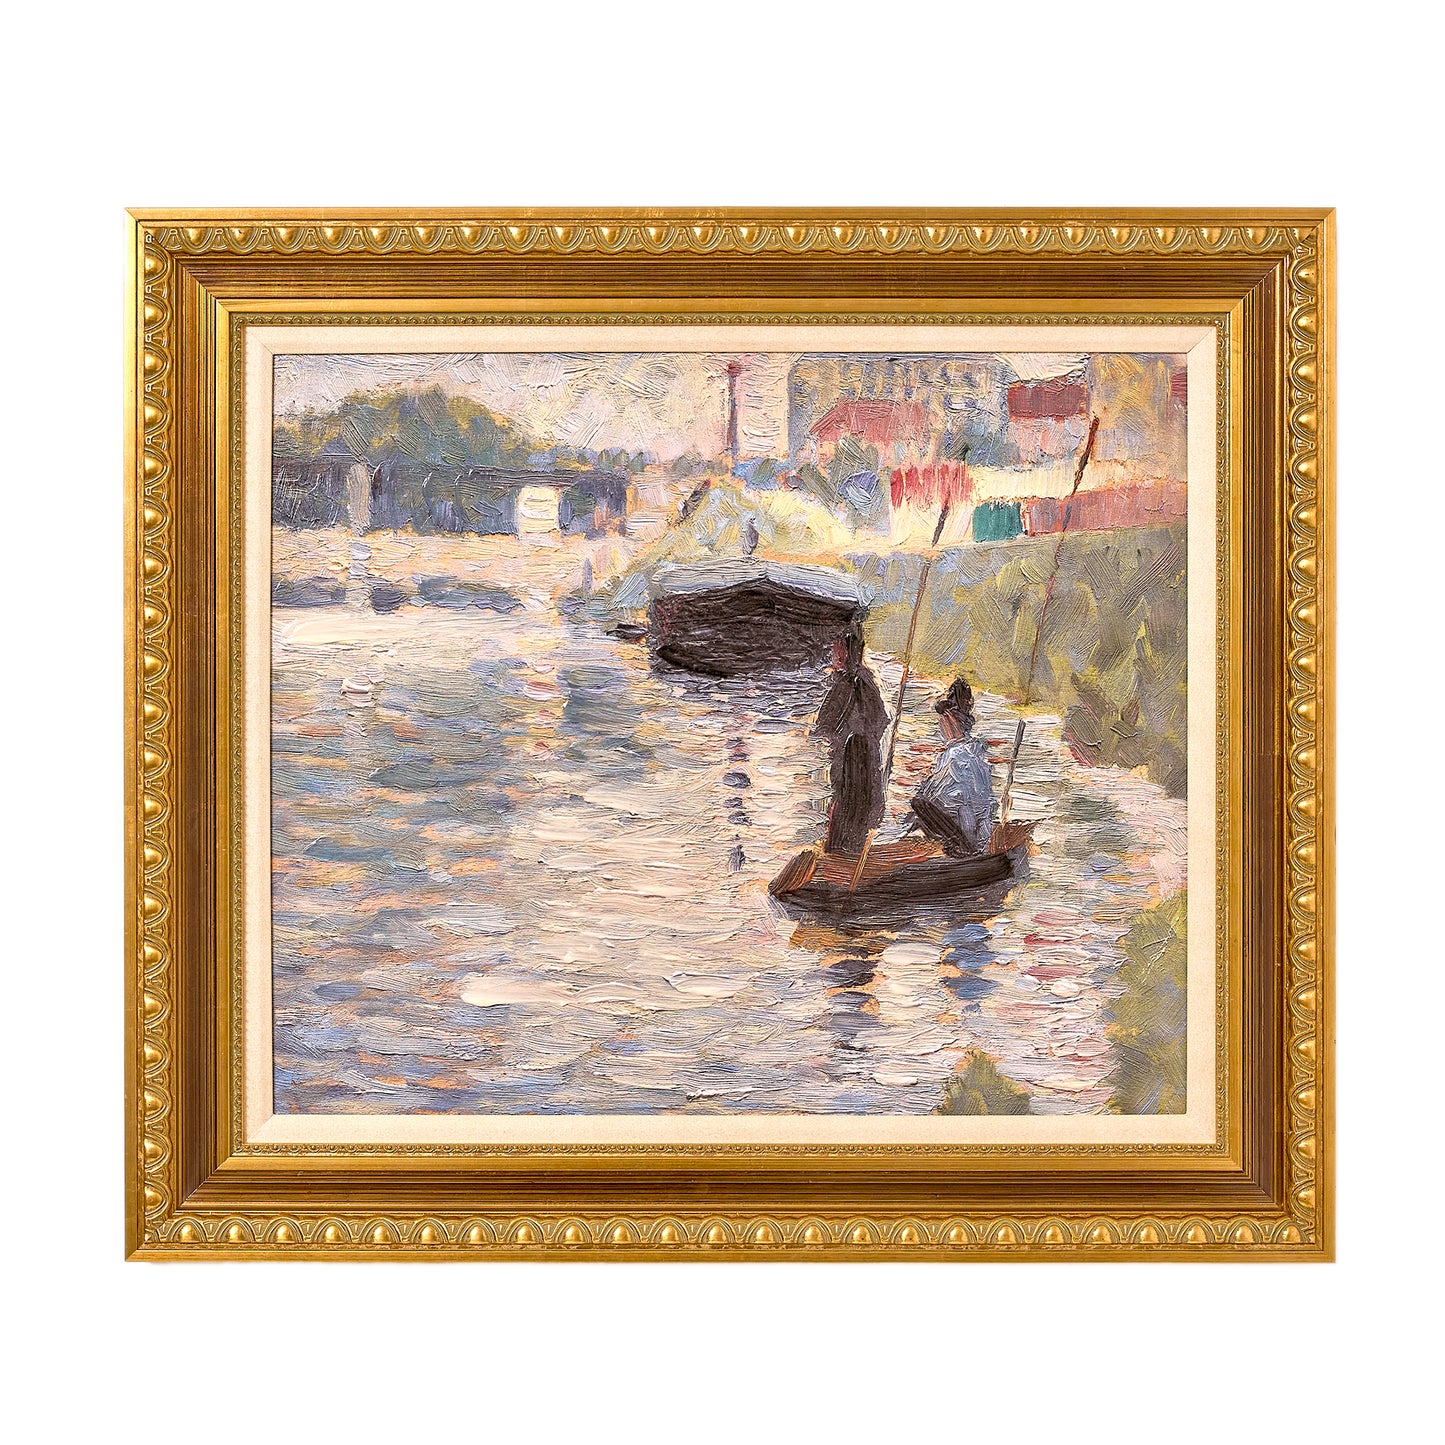 Ornate Framed View of the Siene Canvas Print by Georges Seurat 30.75" x 26.75"